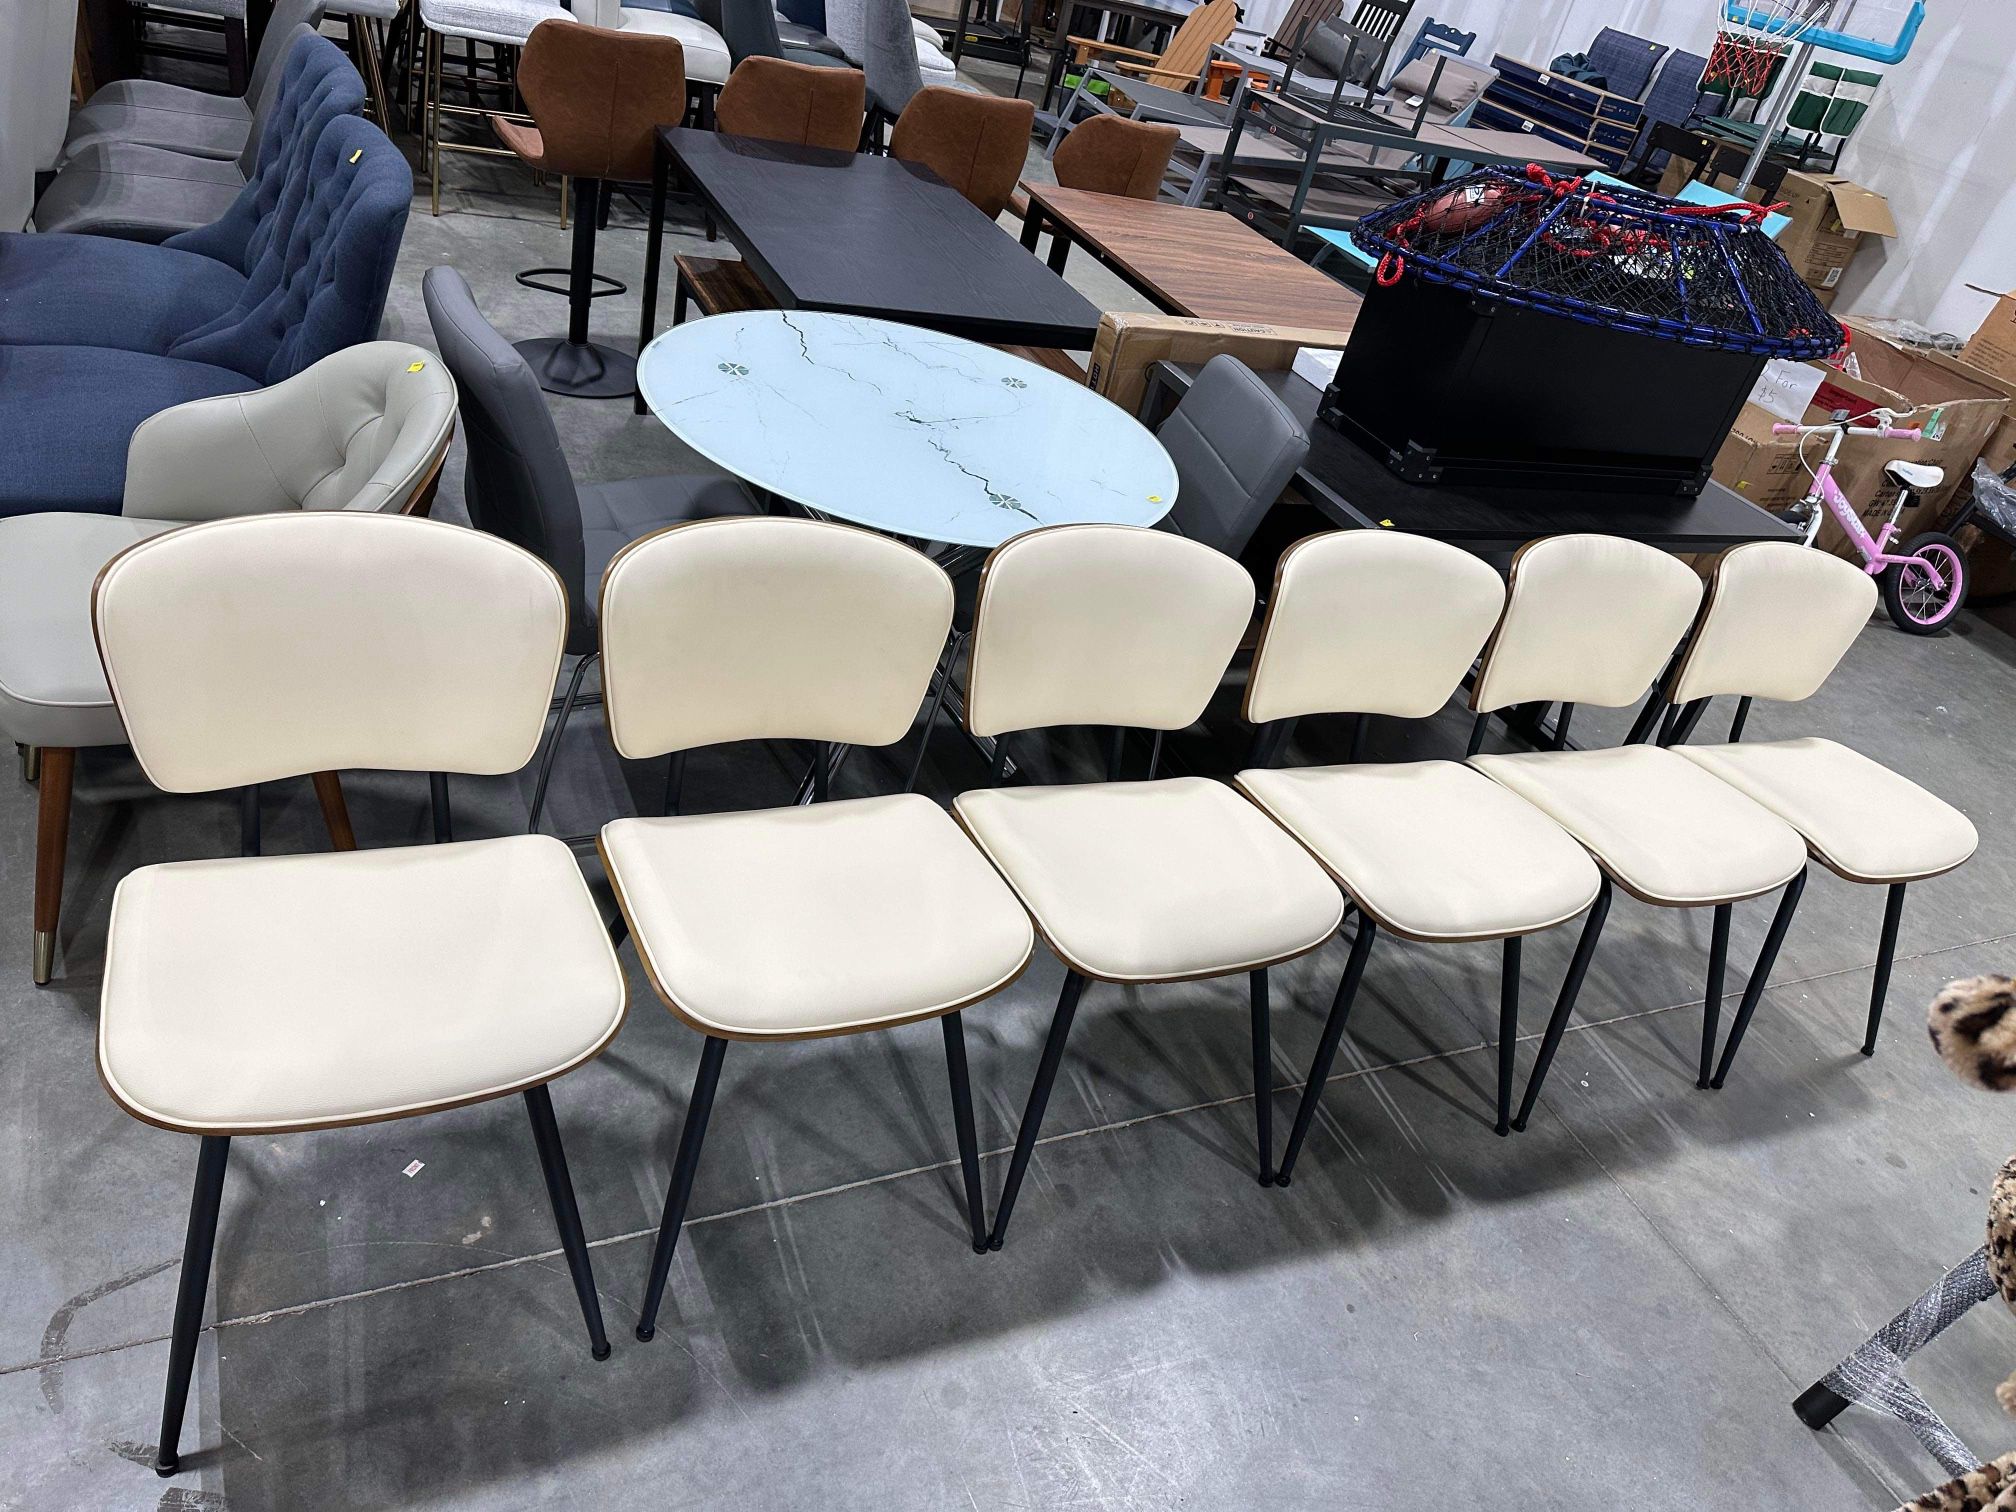 Set of 6 AQG Dining Chairs Mid Century Modern Dining Chairs for Kitchen Dining Living Room Chairs, Beige(damage on two)